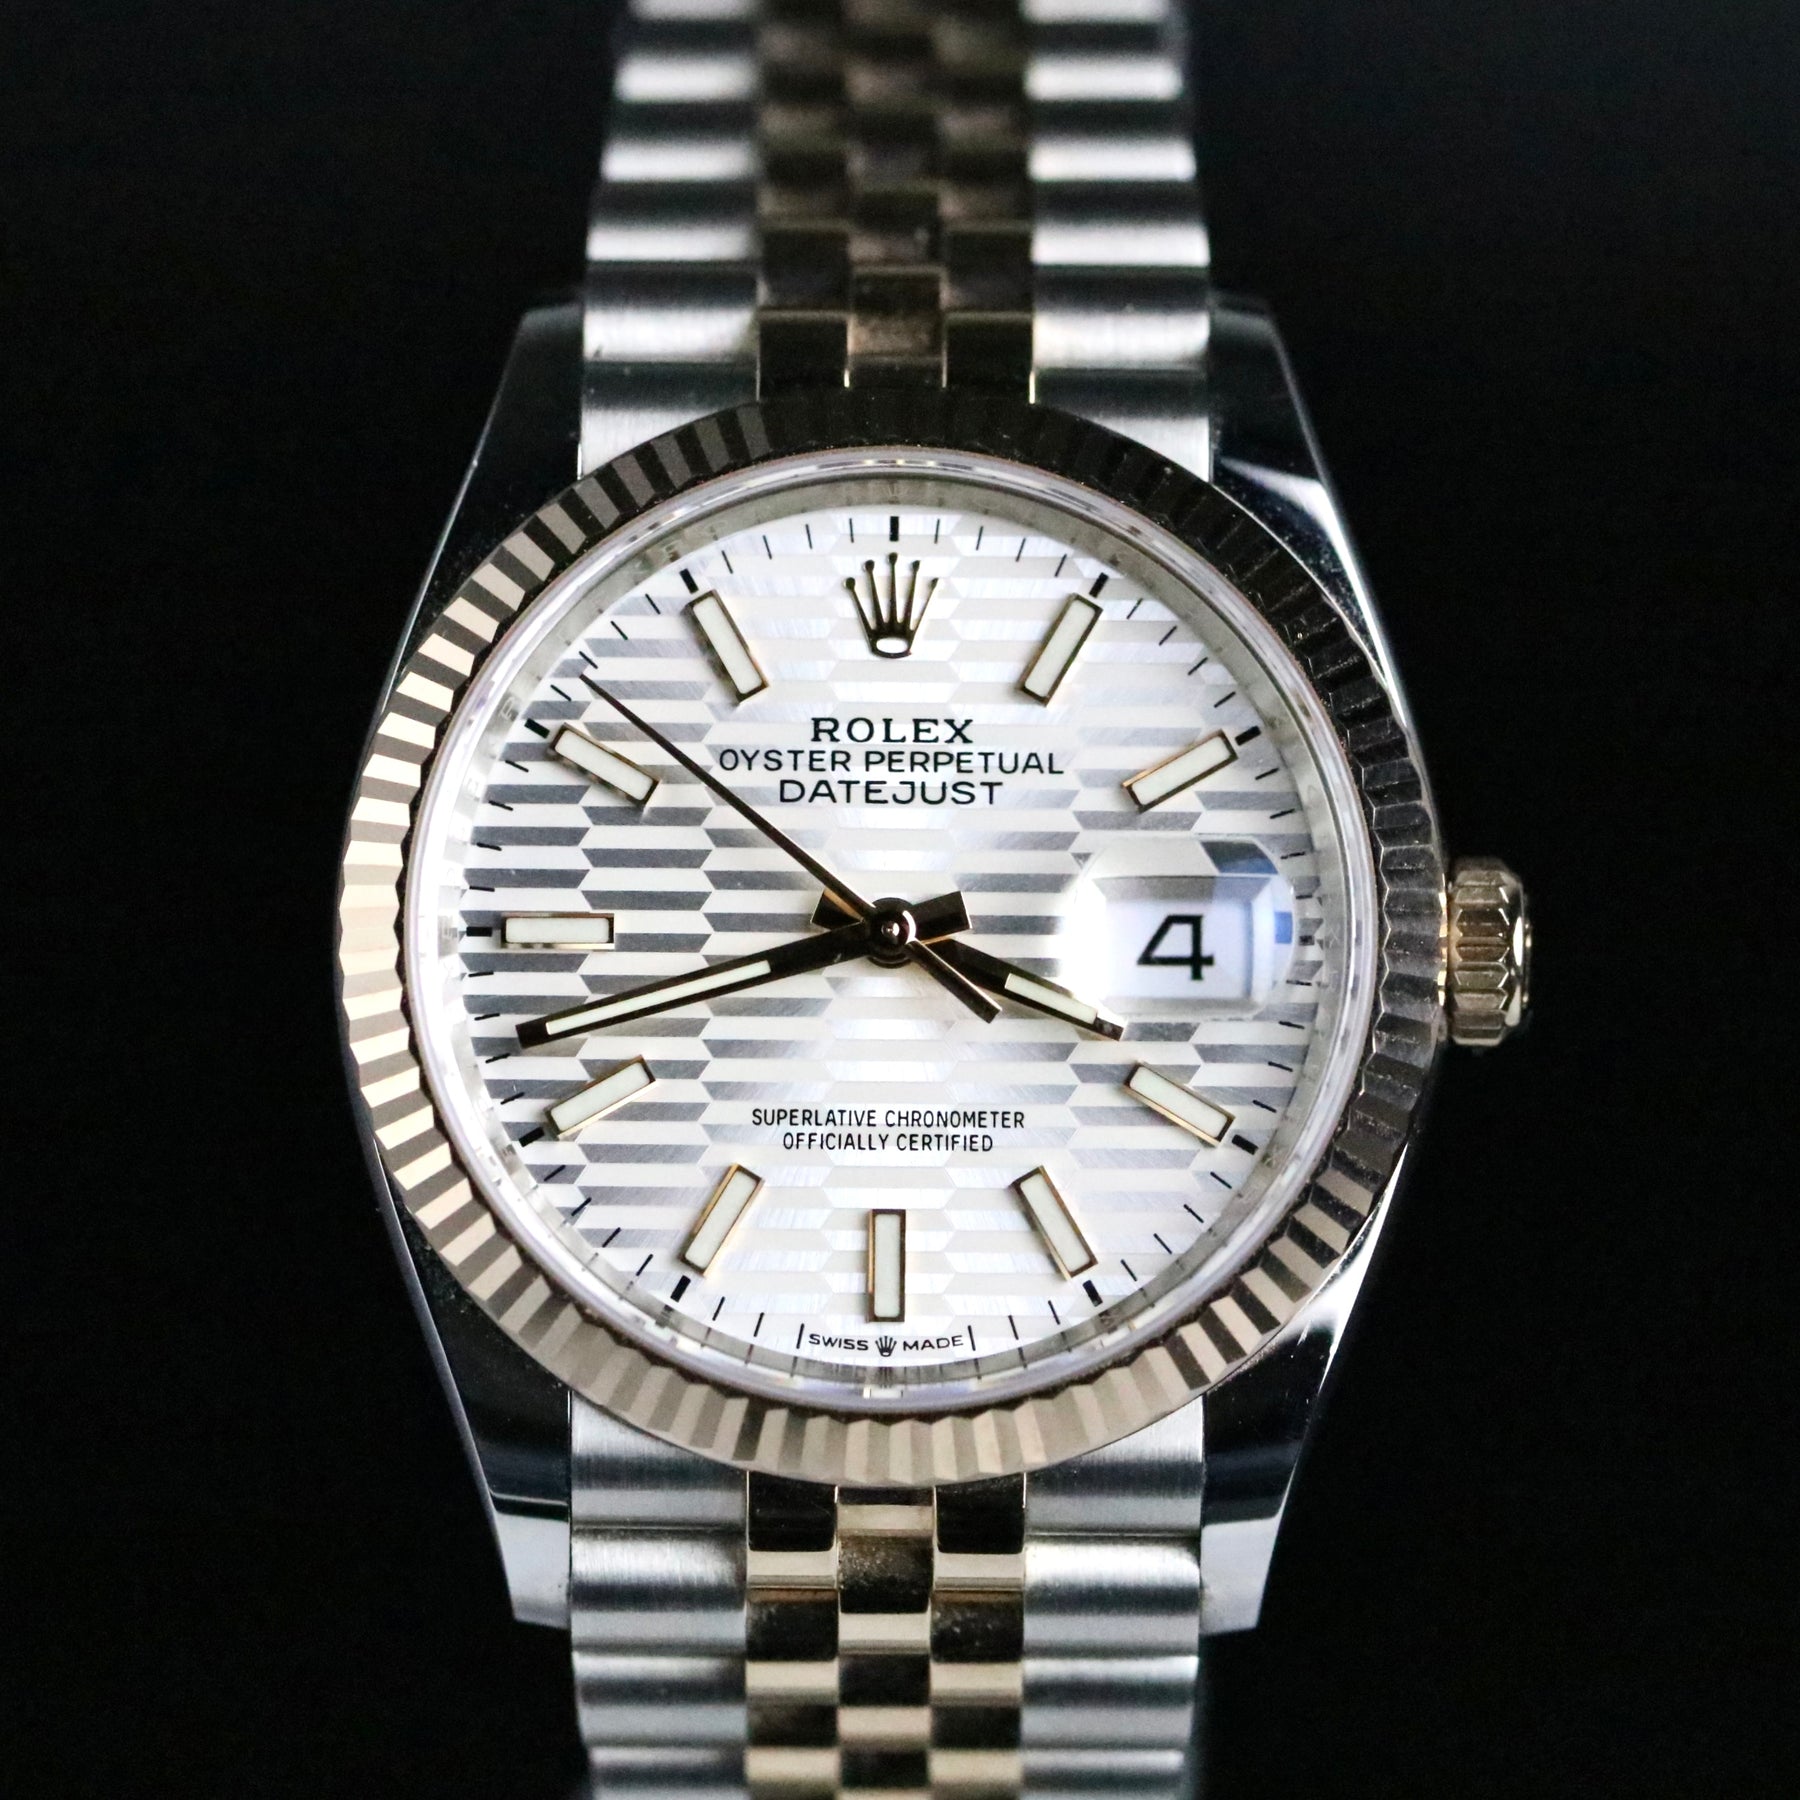 2022 Rolex 126231 Datejust 36mm White Motif Dial with Box & Papers